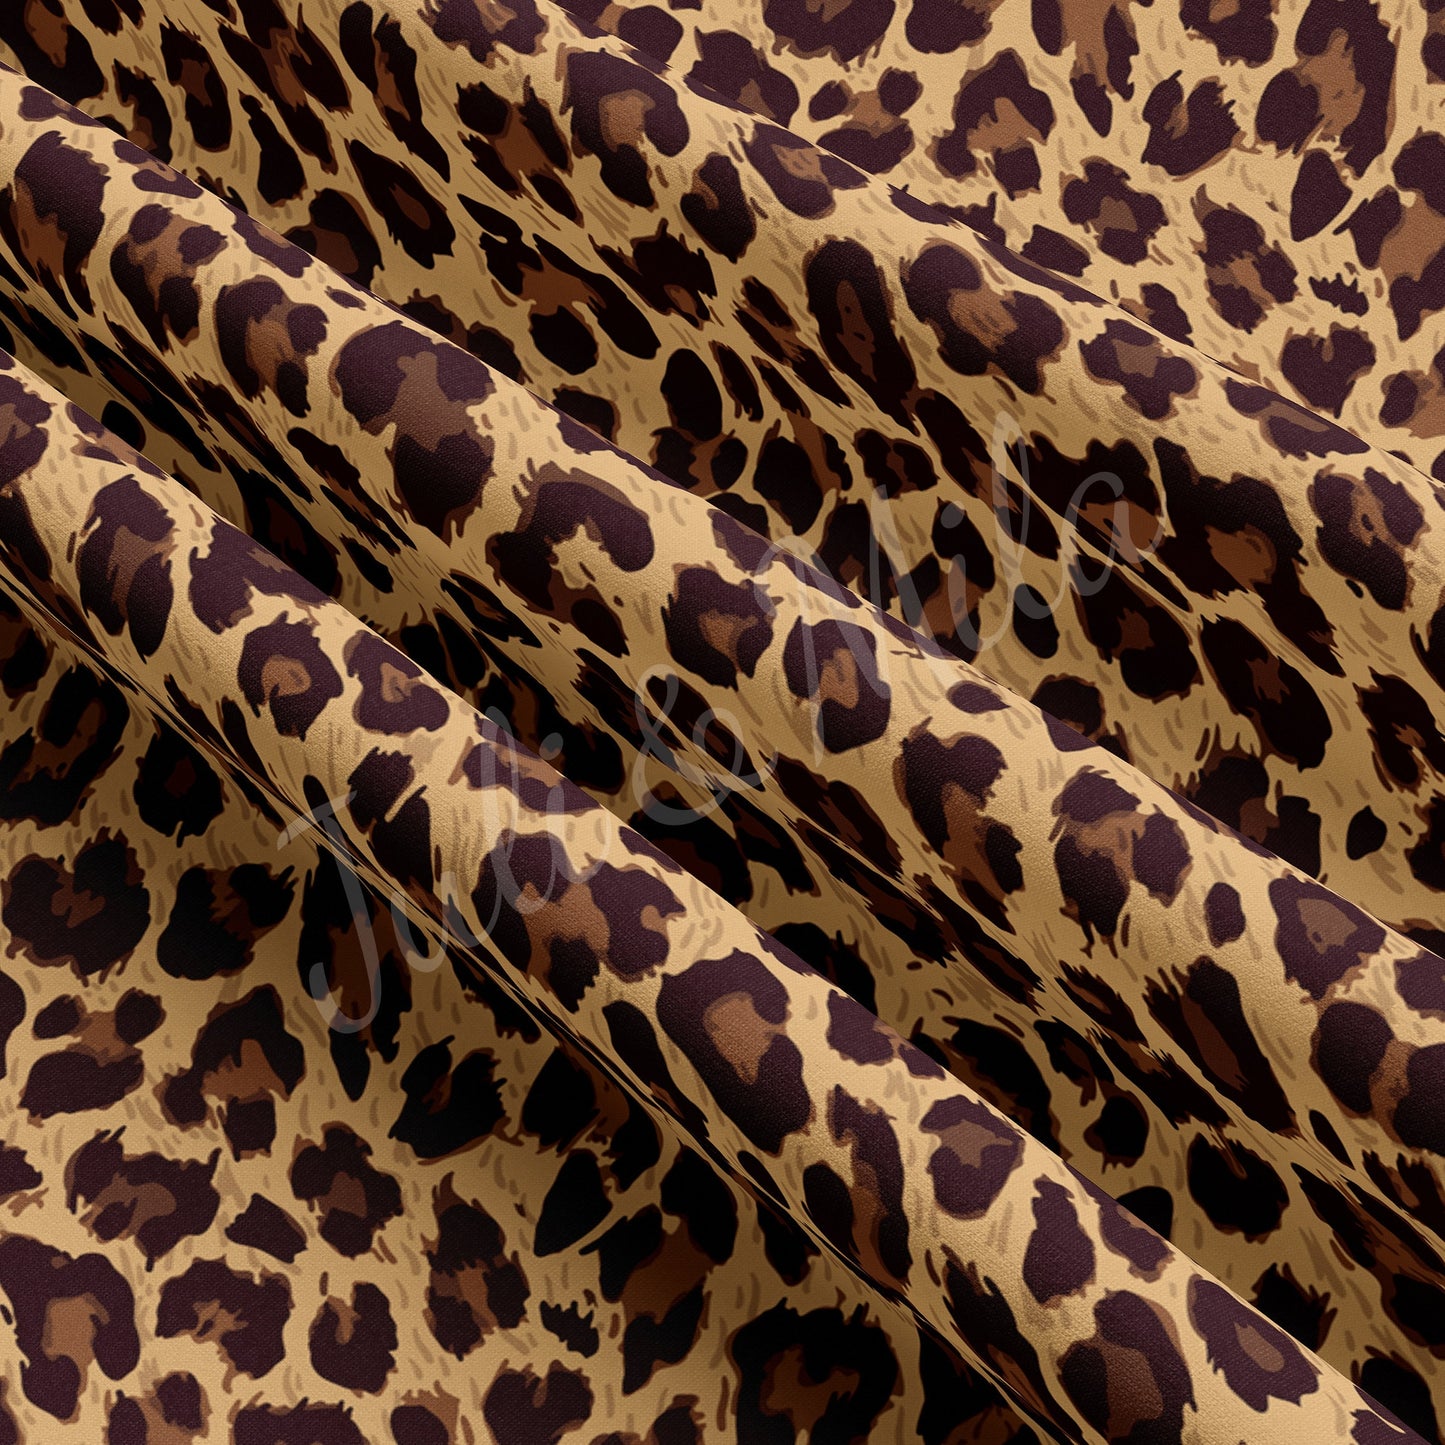 DBP Fabric Double Brushed Polyester Fabric Leopard